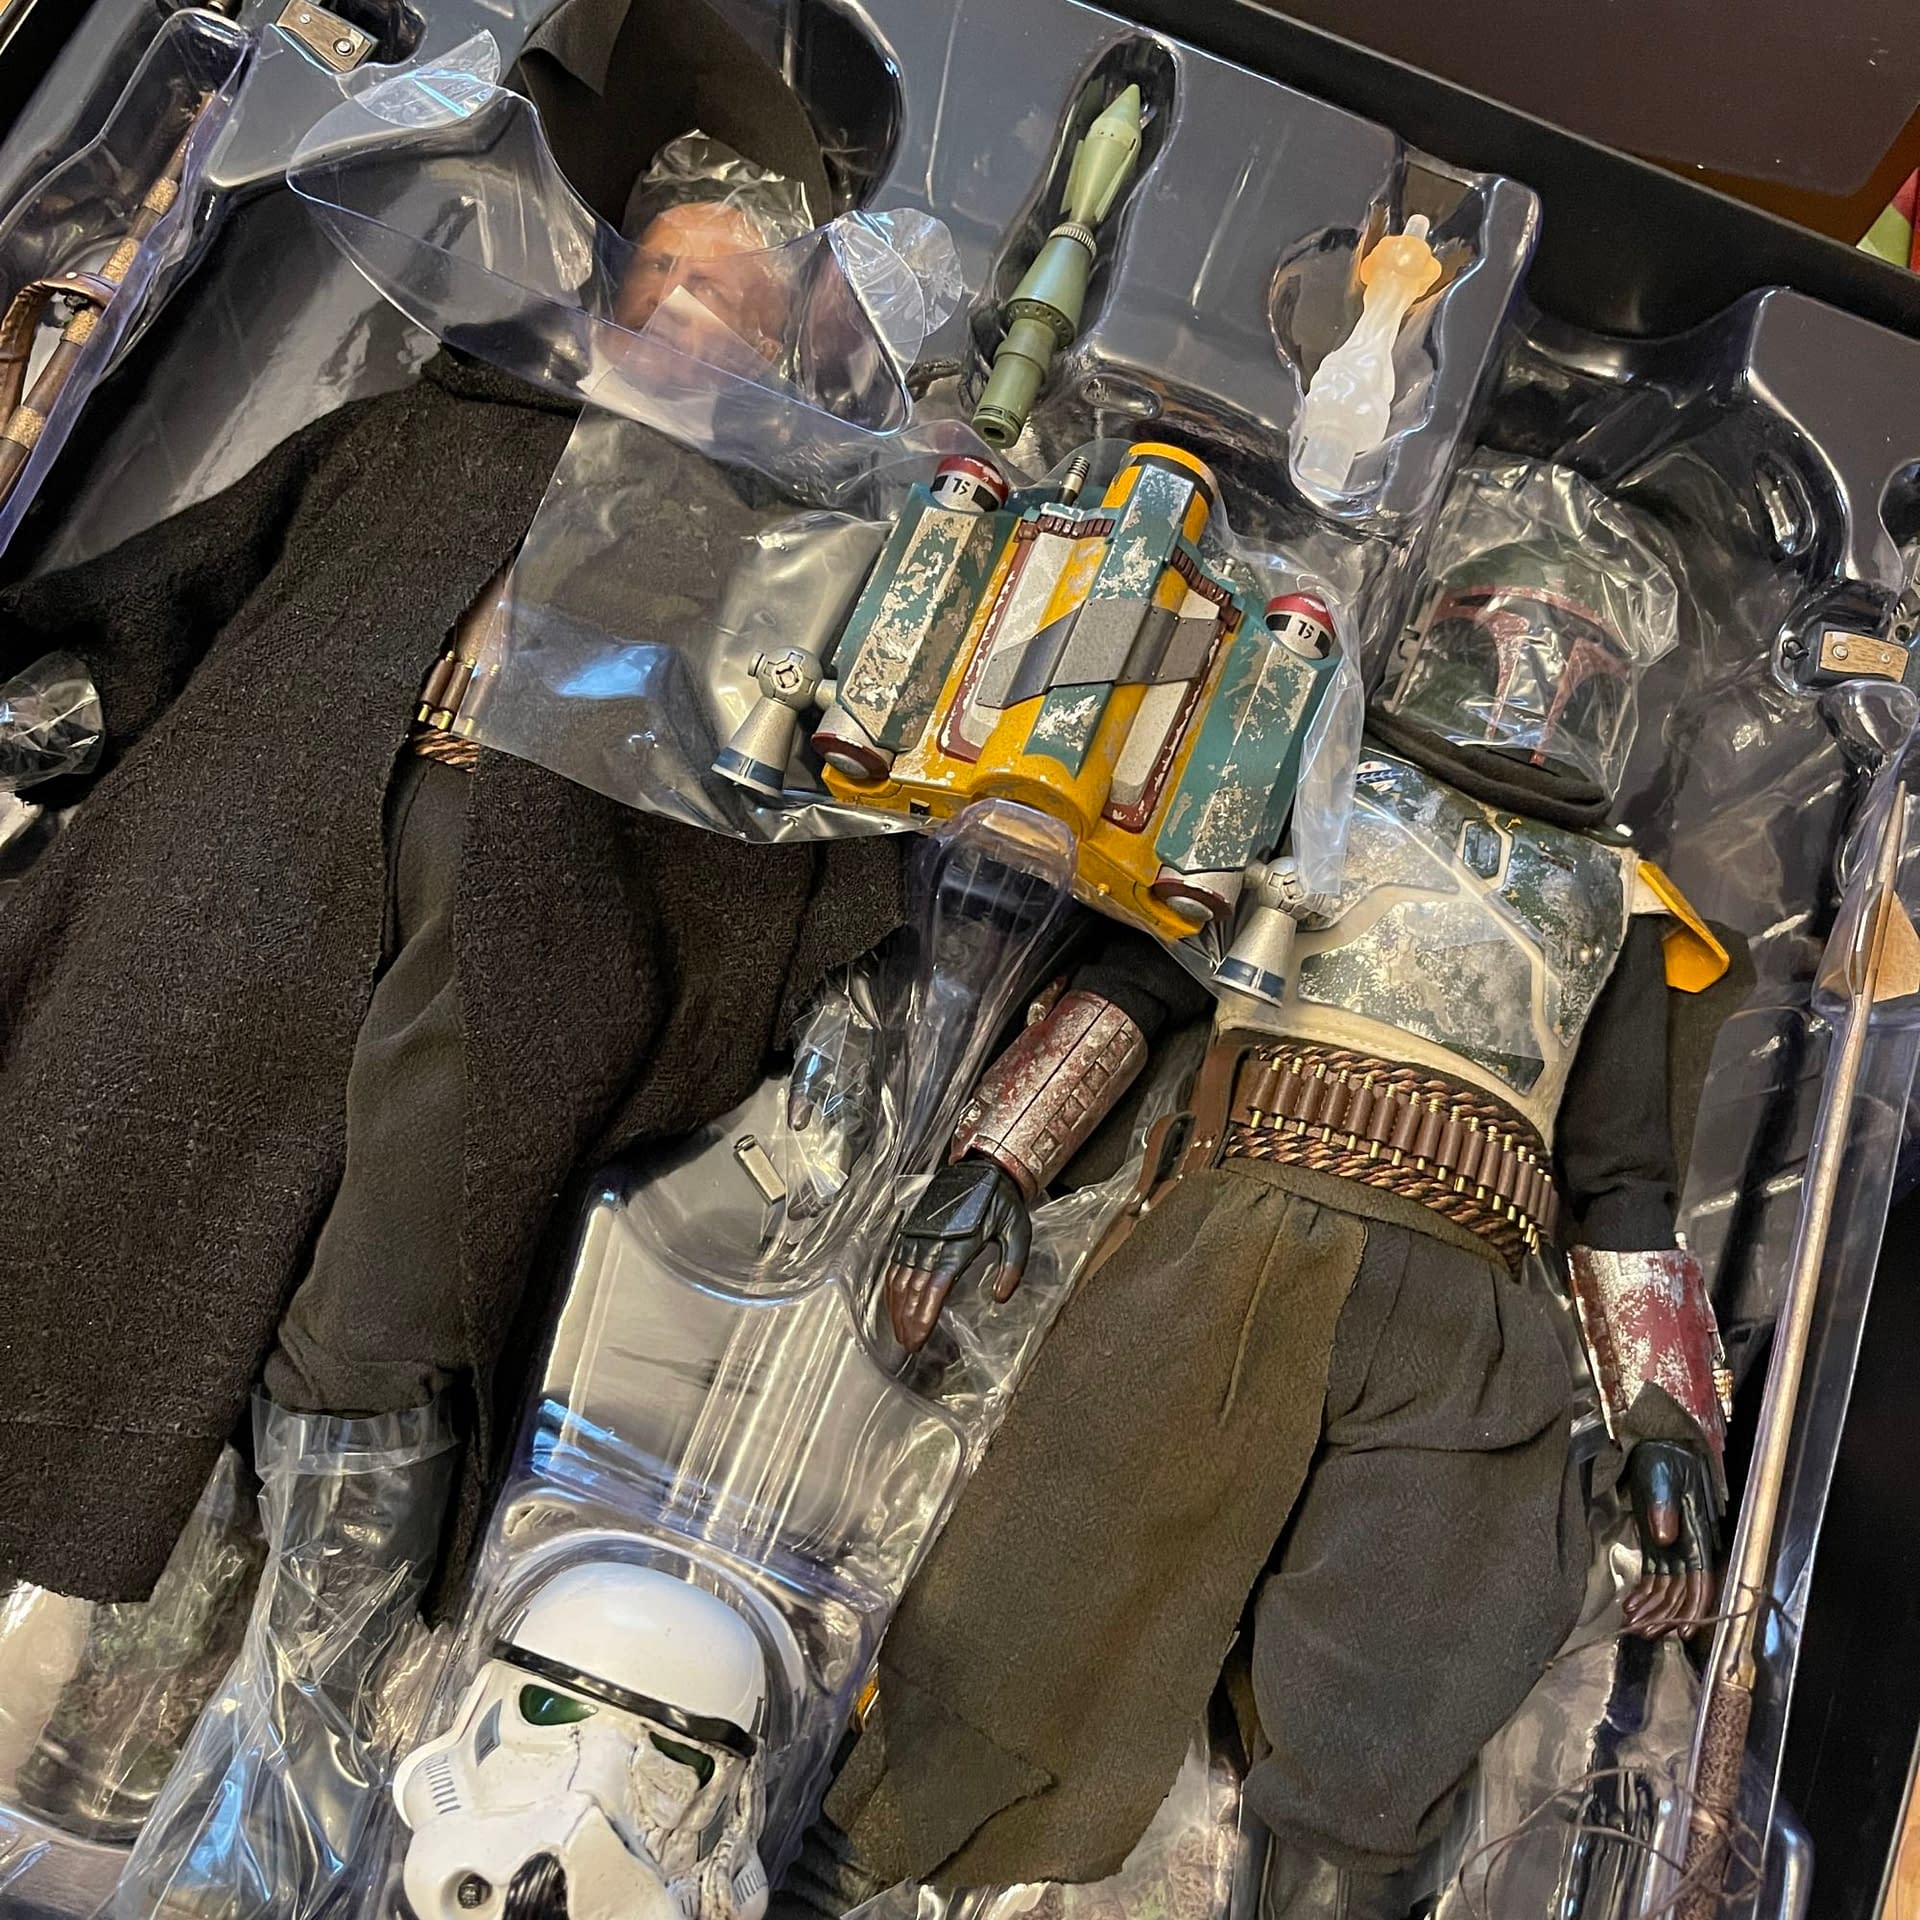 Star Wars Hot Toys Deluxe Boba Fett Set - Just A Simple Man 